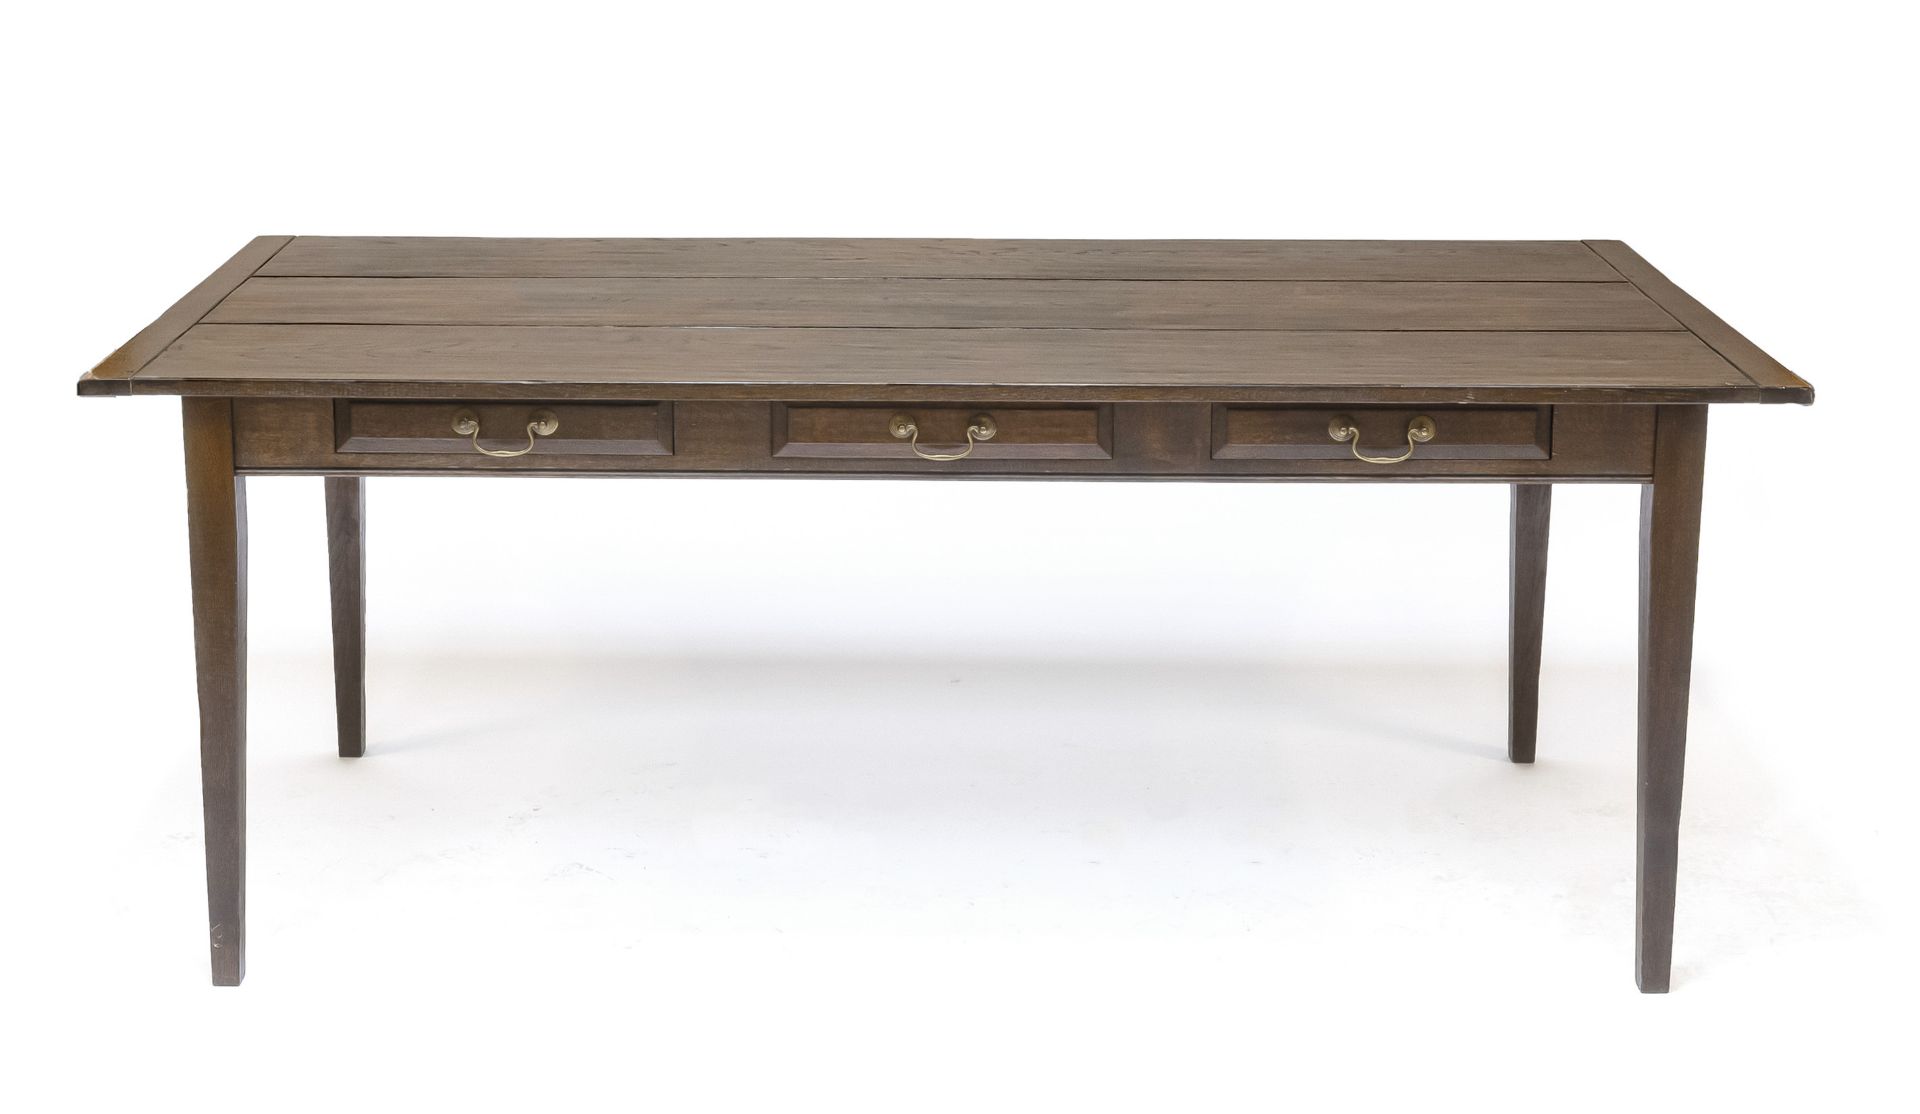 Dining table, late 20th century, solid oak, frame with 3 drawers, 78 x 200 x 90 cm - The furniture